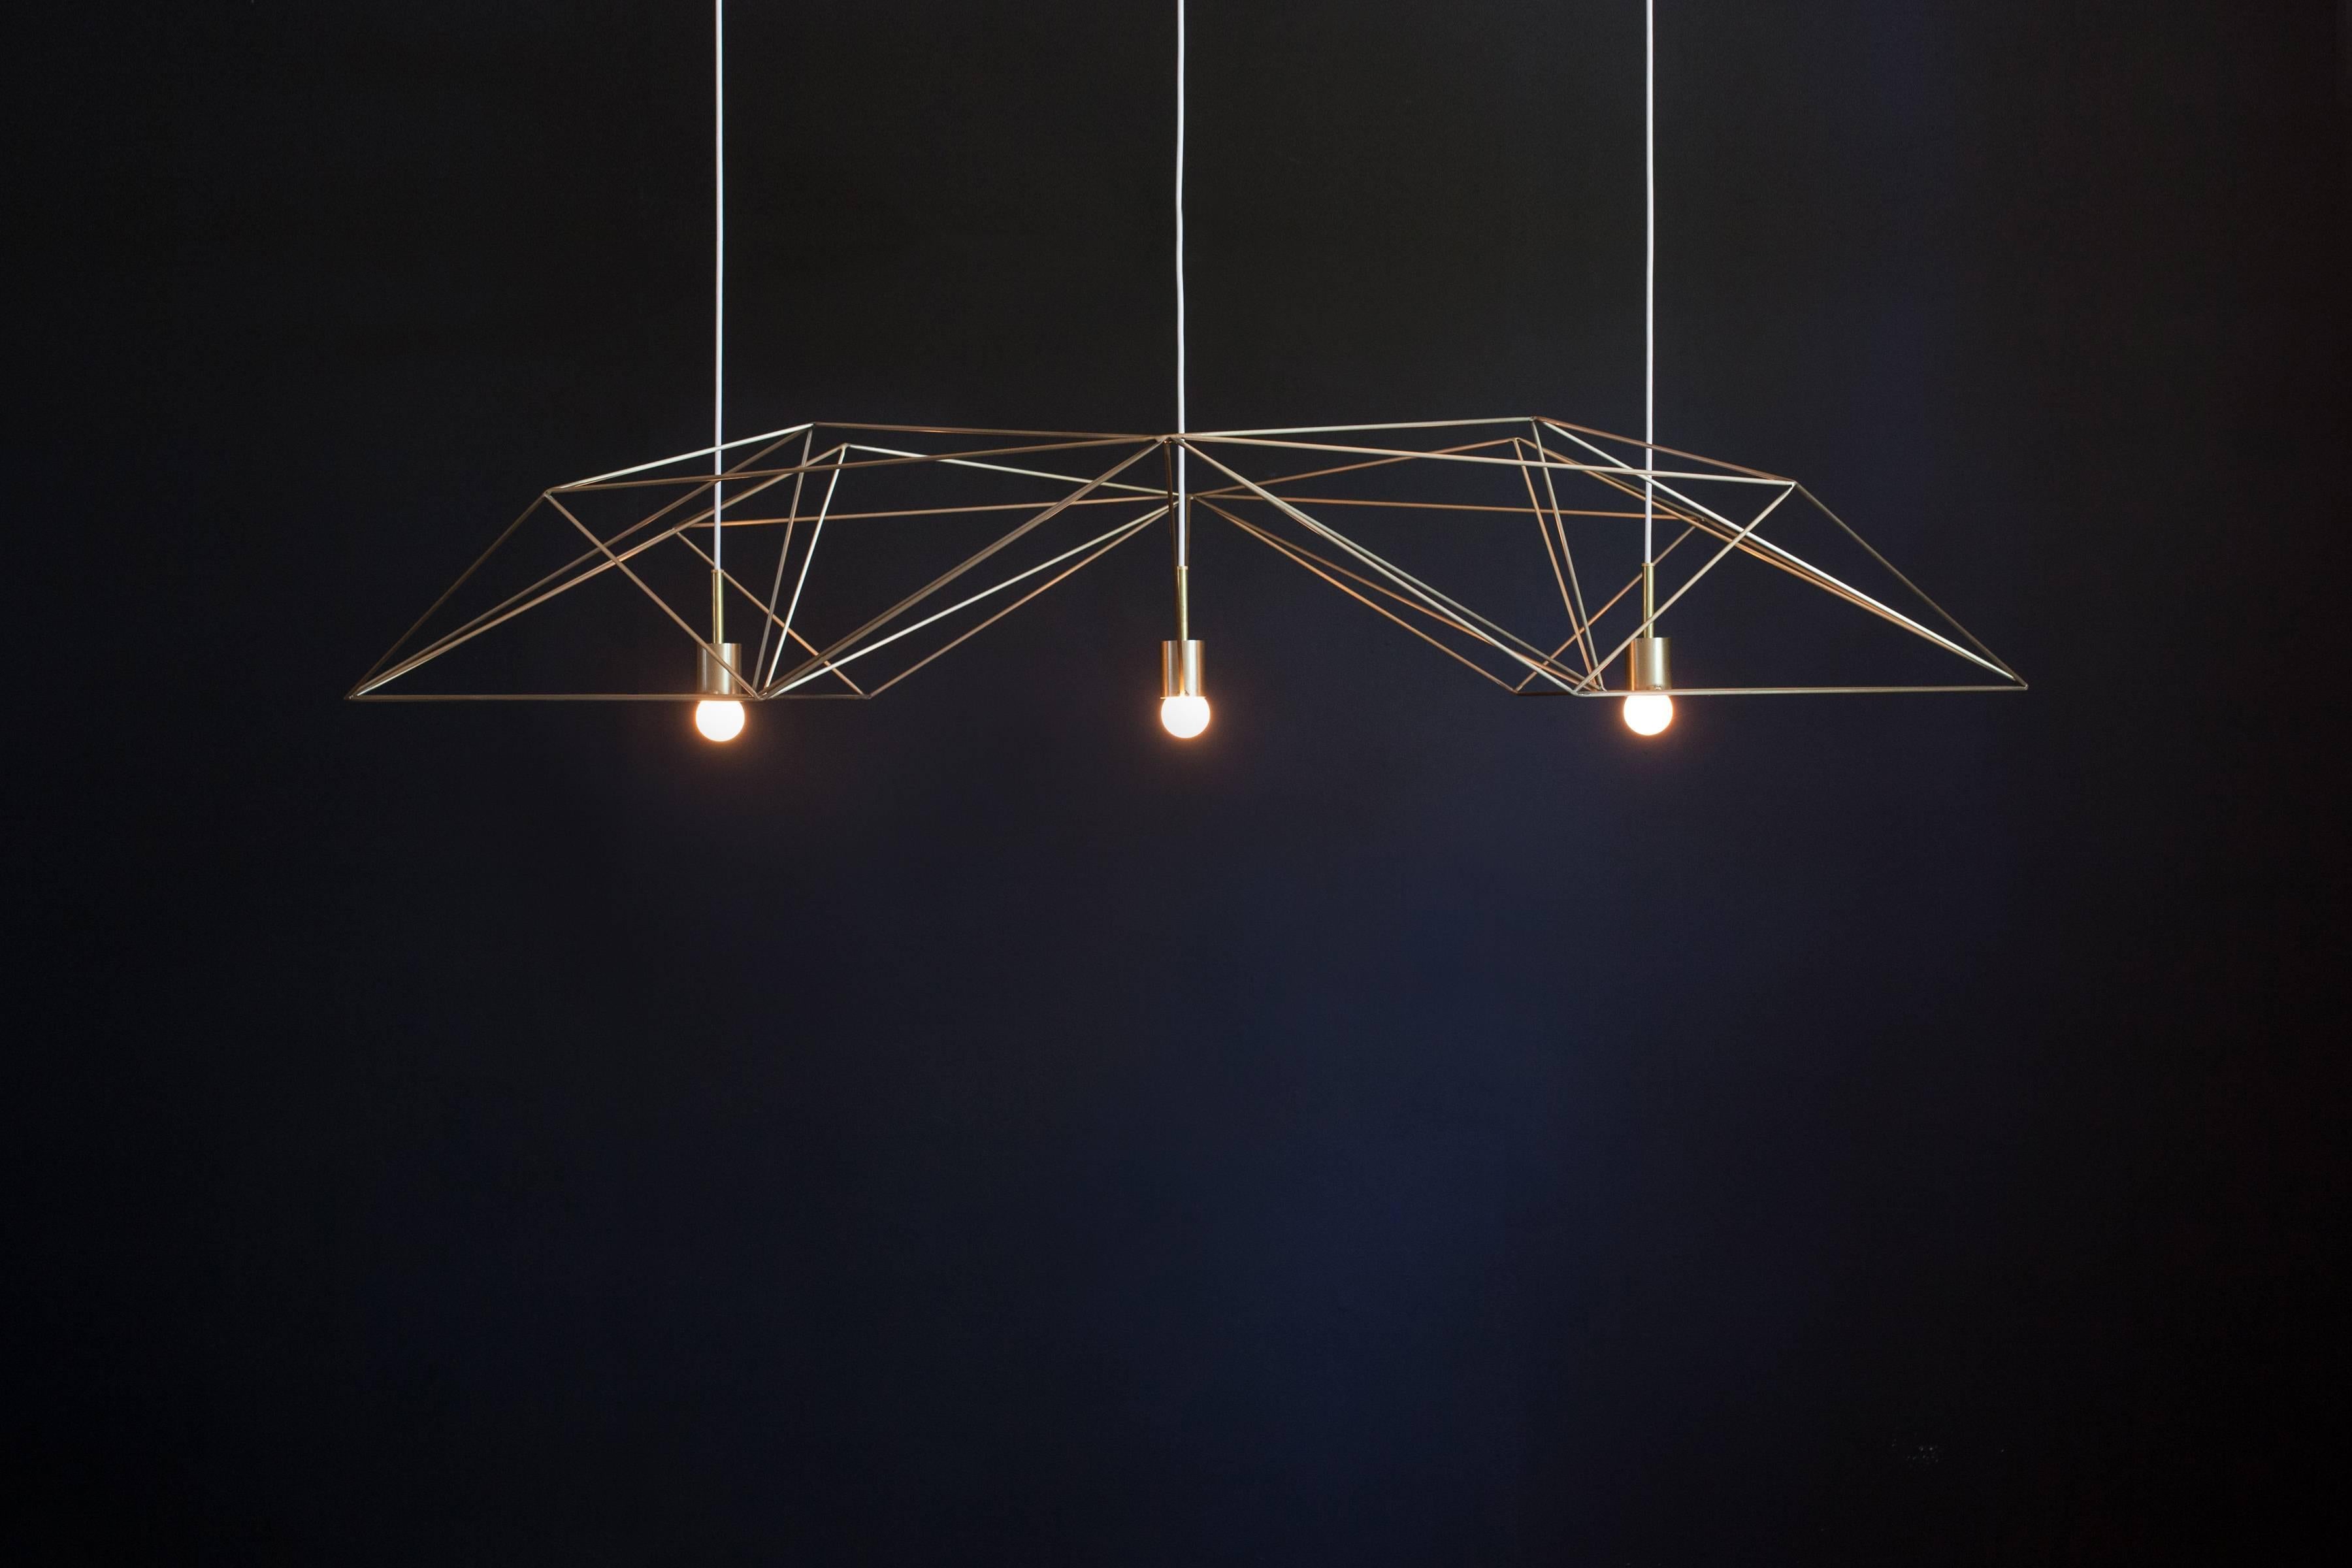 The ‘Crystalline Light’ is a statement chandelier, light in form yet strong in presence. Inspired from mineralogy, this piece – crafted from thin steel rods – gives form and movement to complex patterns depending on your viewpoint. It’s geometric